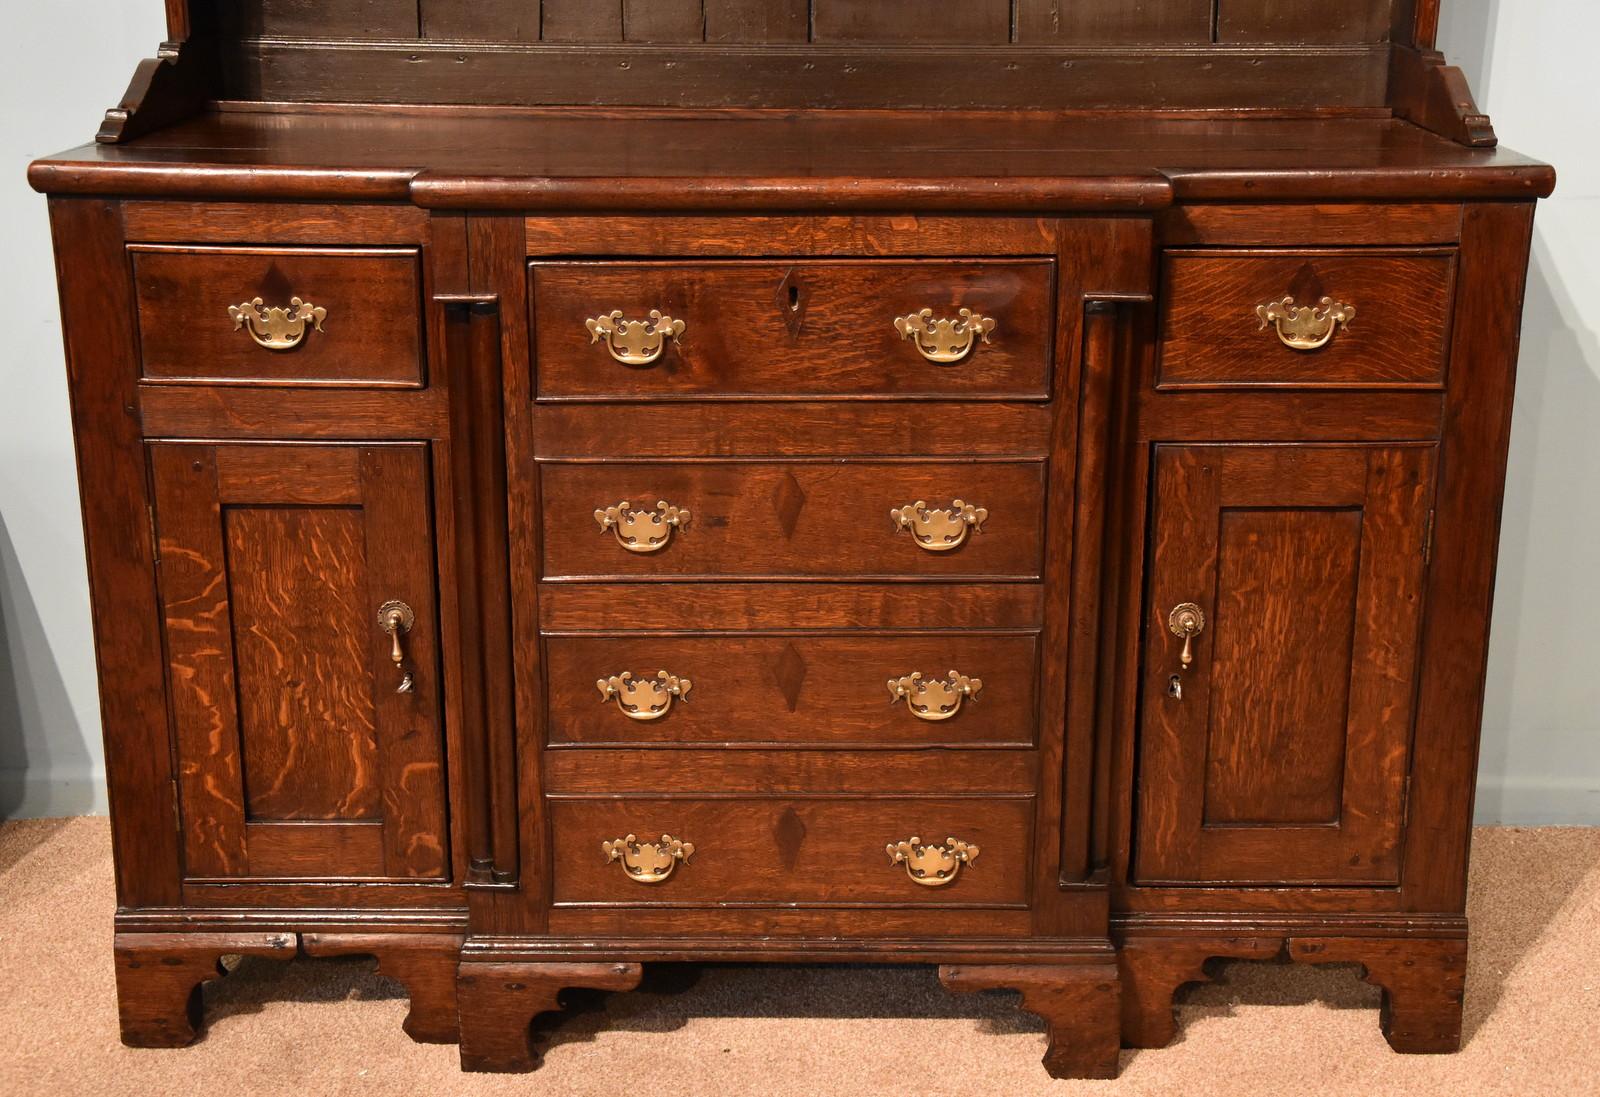 An elegant George III oak North country dresser with rack.

Dimensions:
Height 75.5